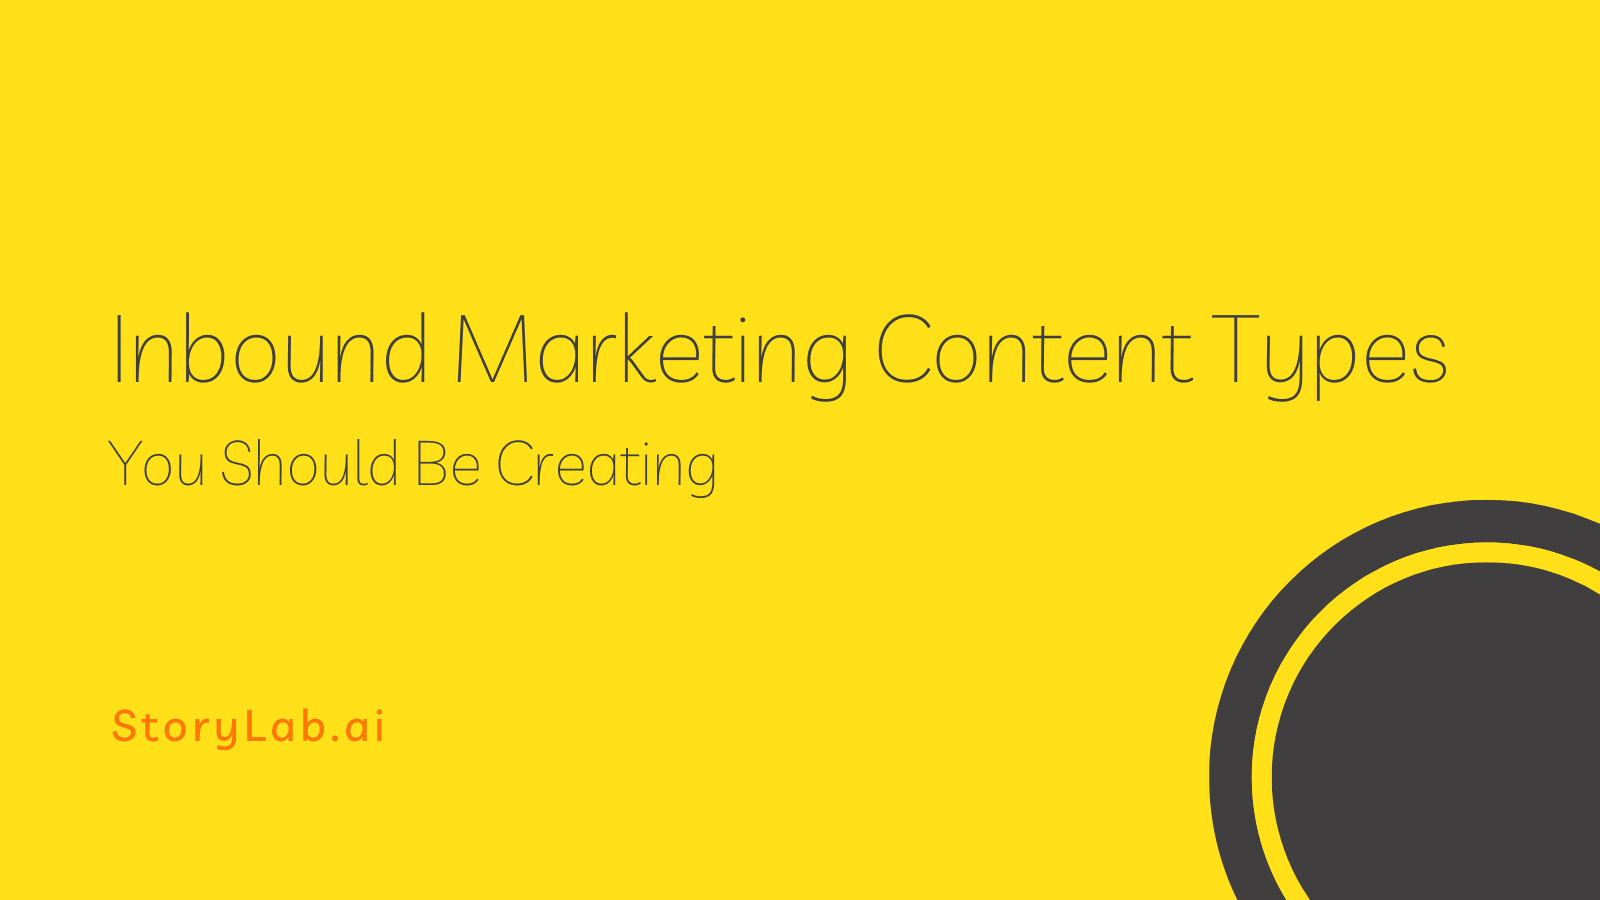 Inbound Marketing Content Types You Should Be Creating